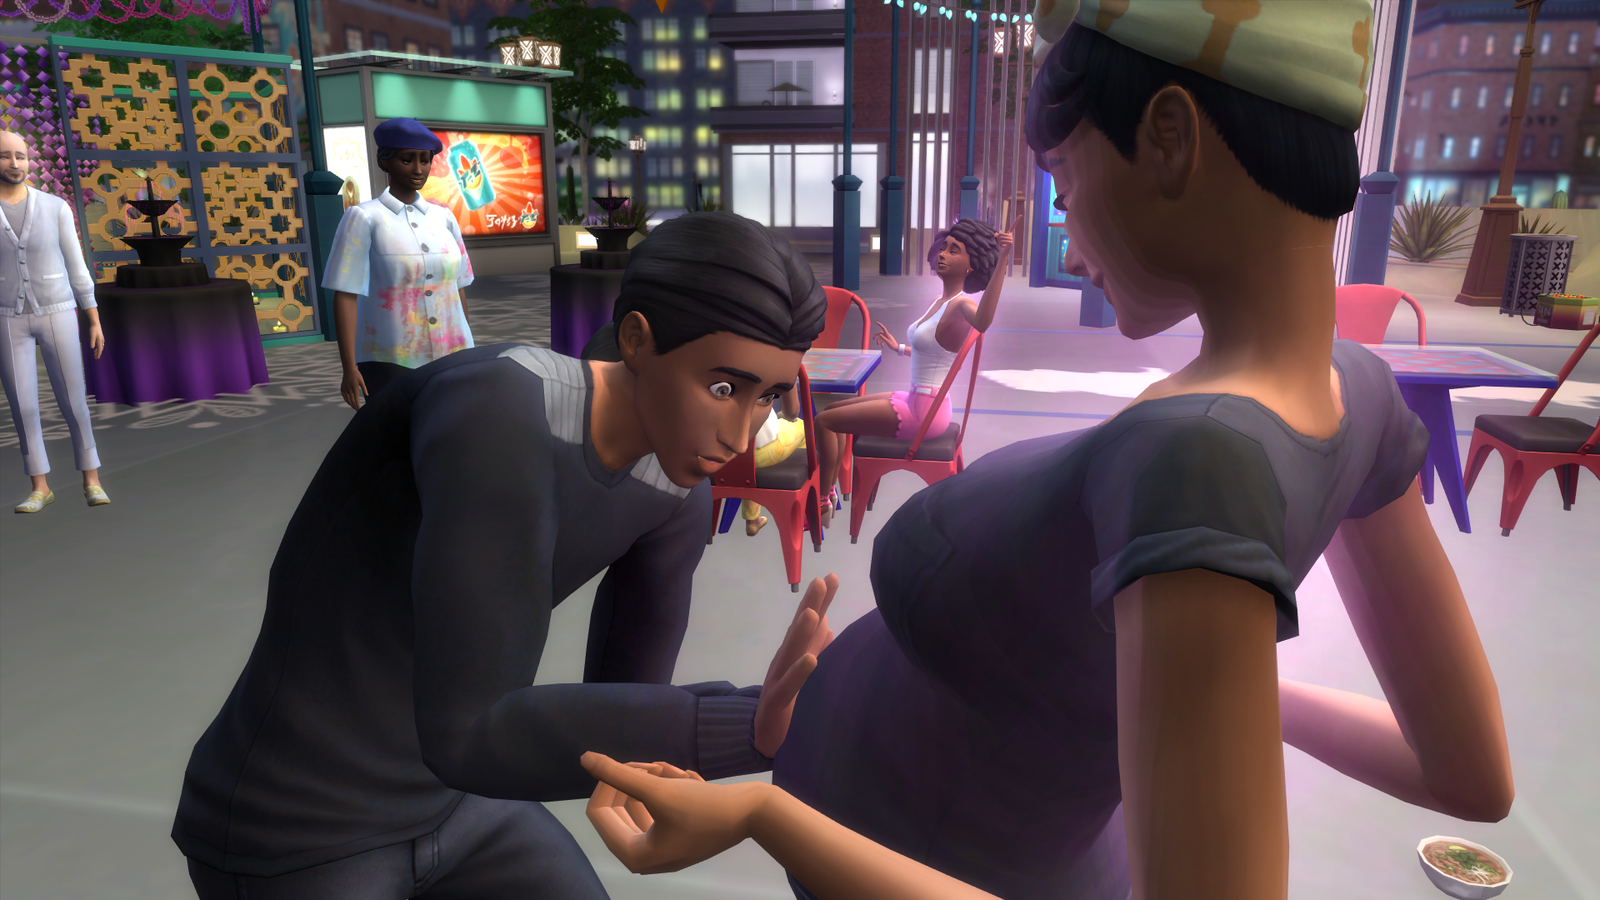 You can get The Sims 4 for free on PC right now